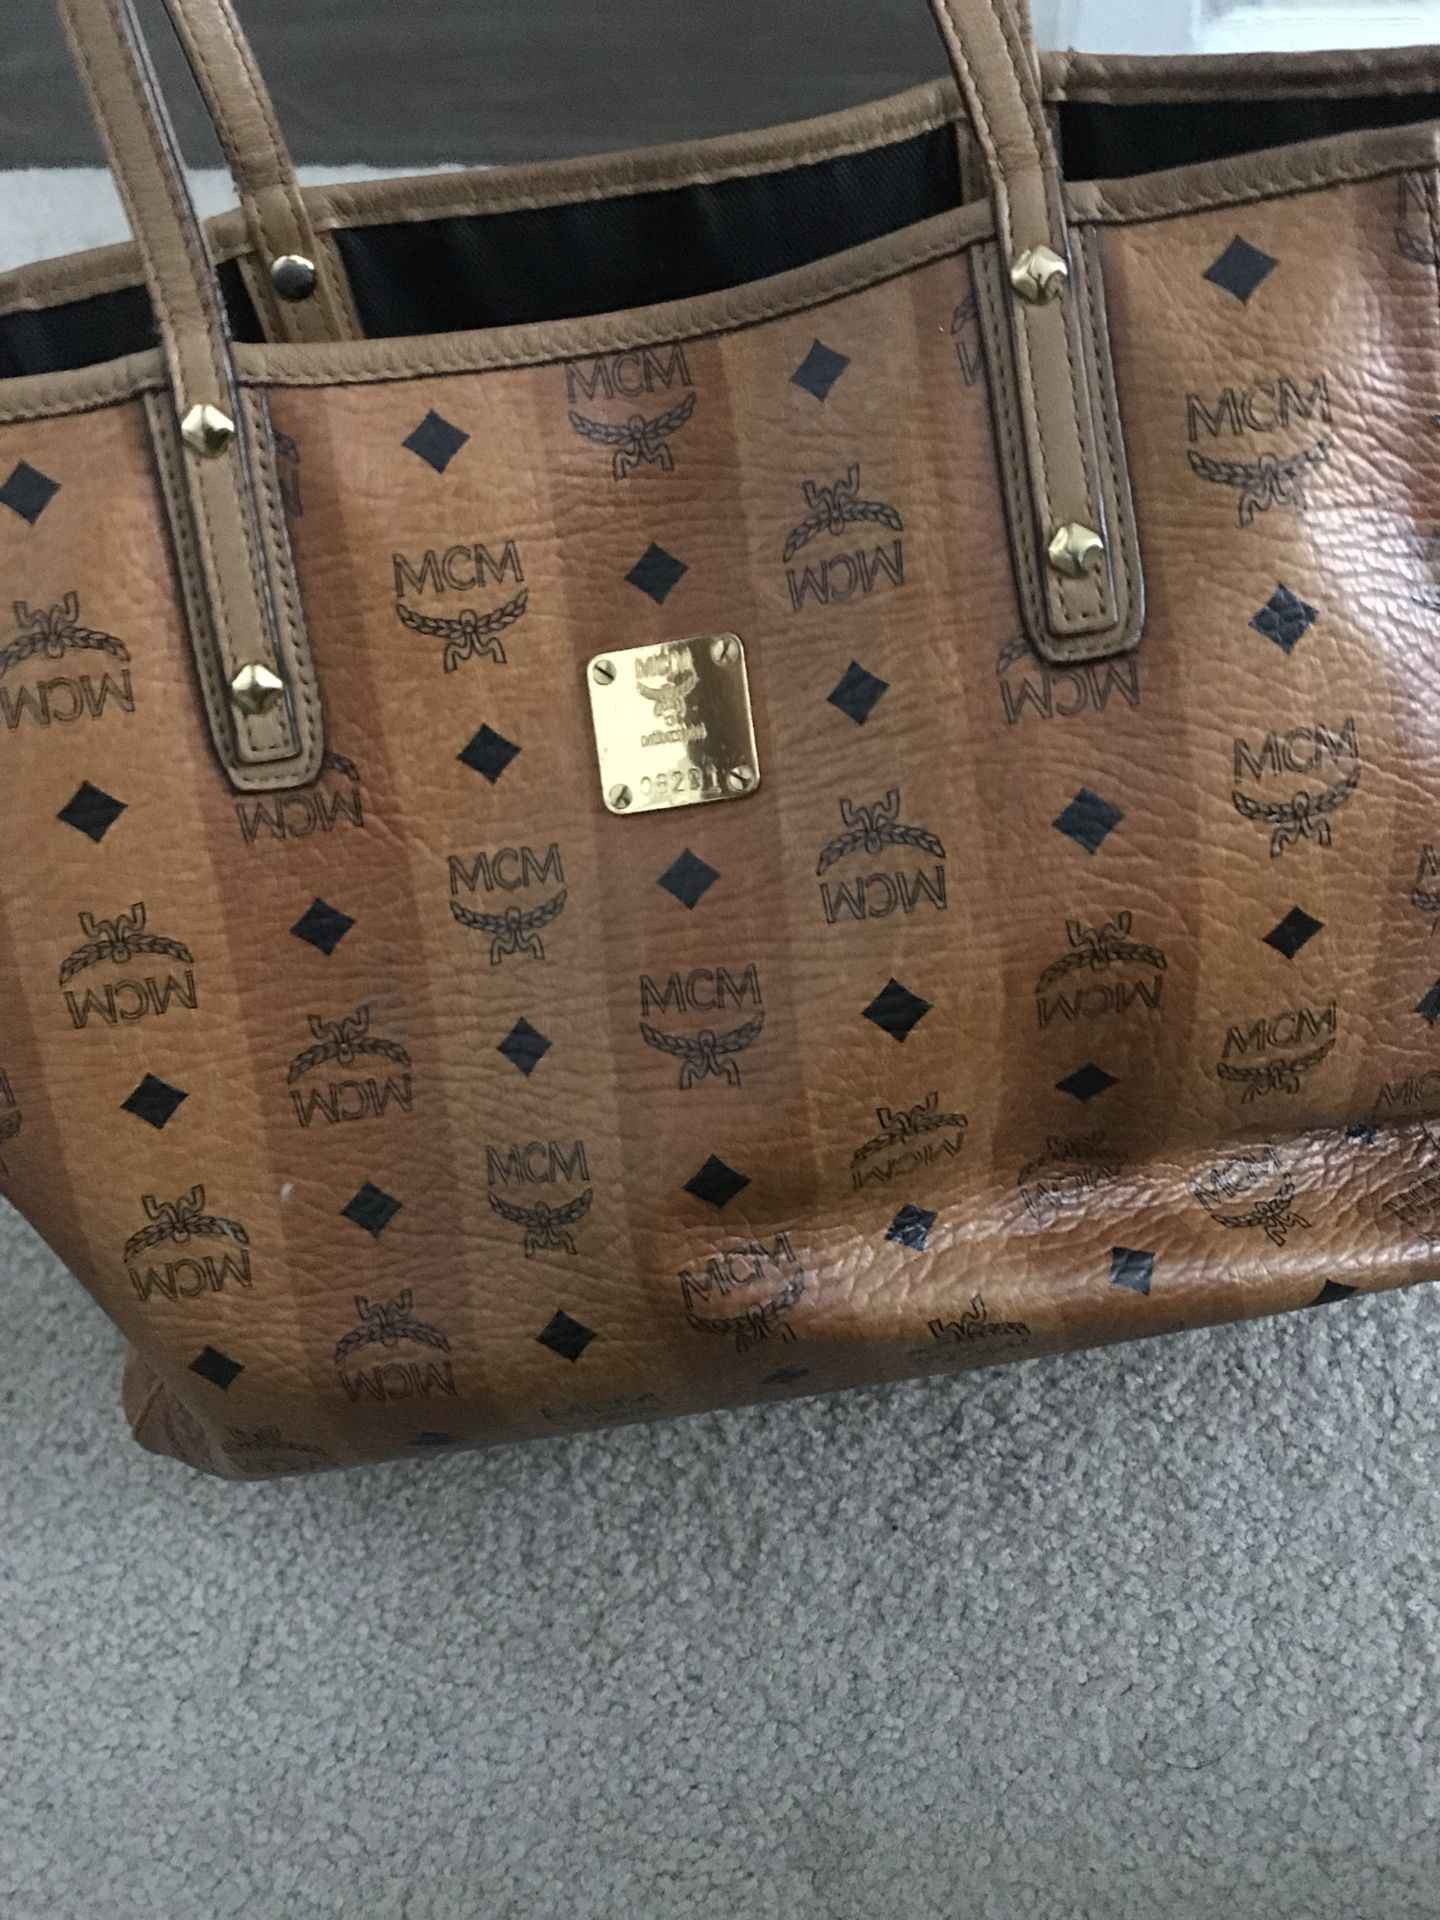 Authentic Mcm Bag for Sale in Laurel, MD - OfferUp